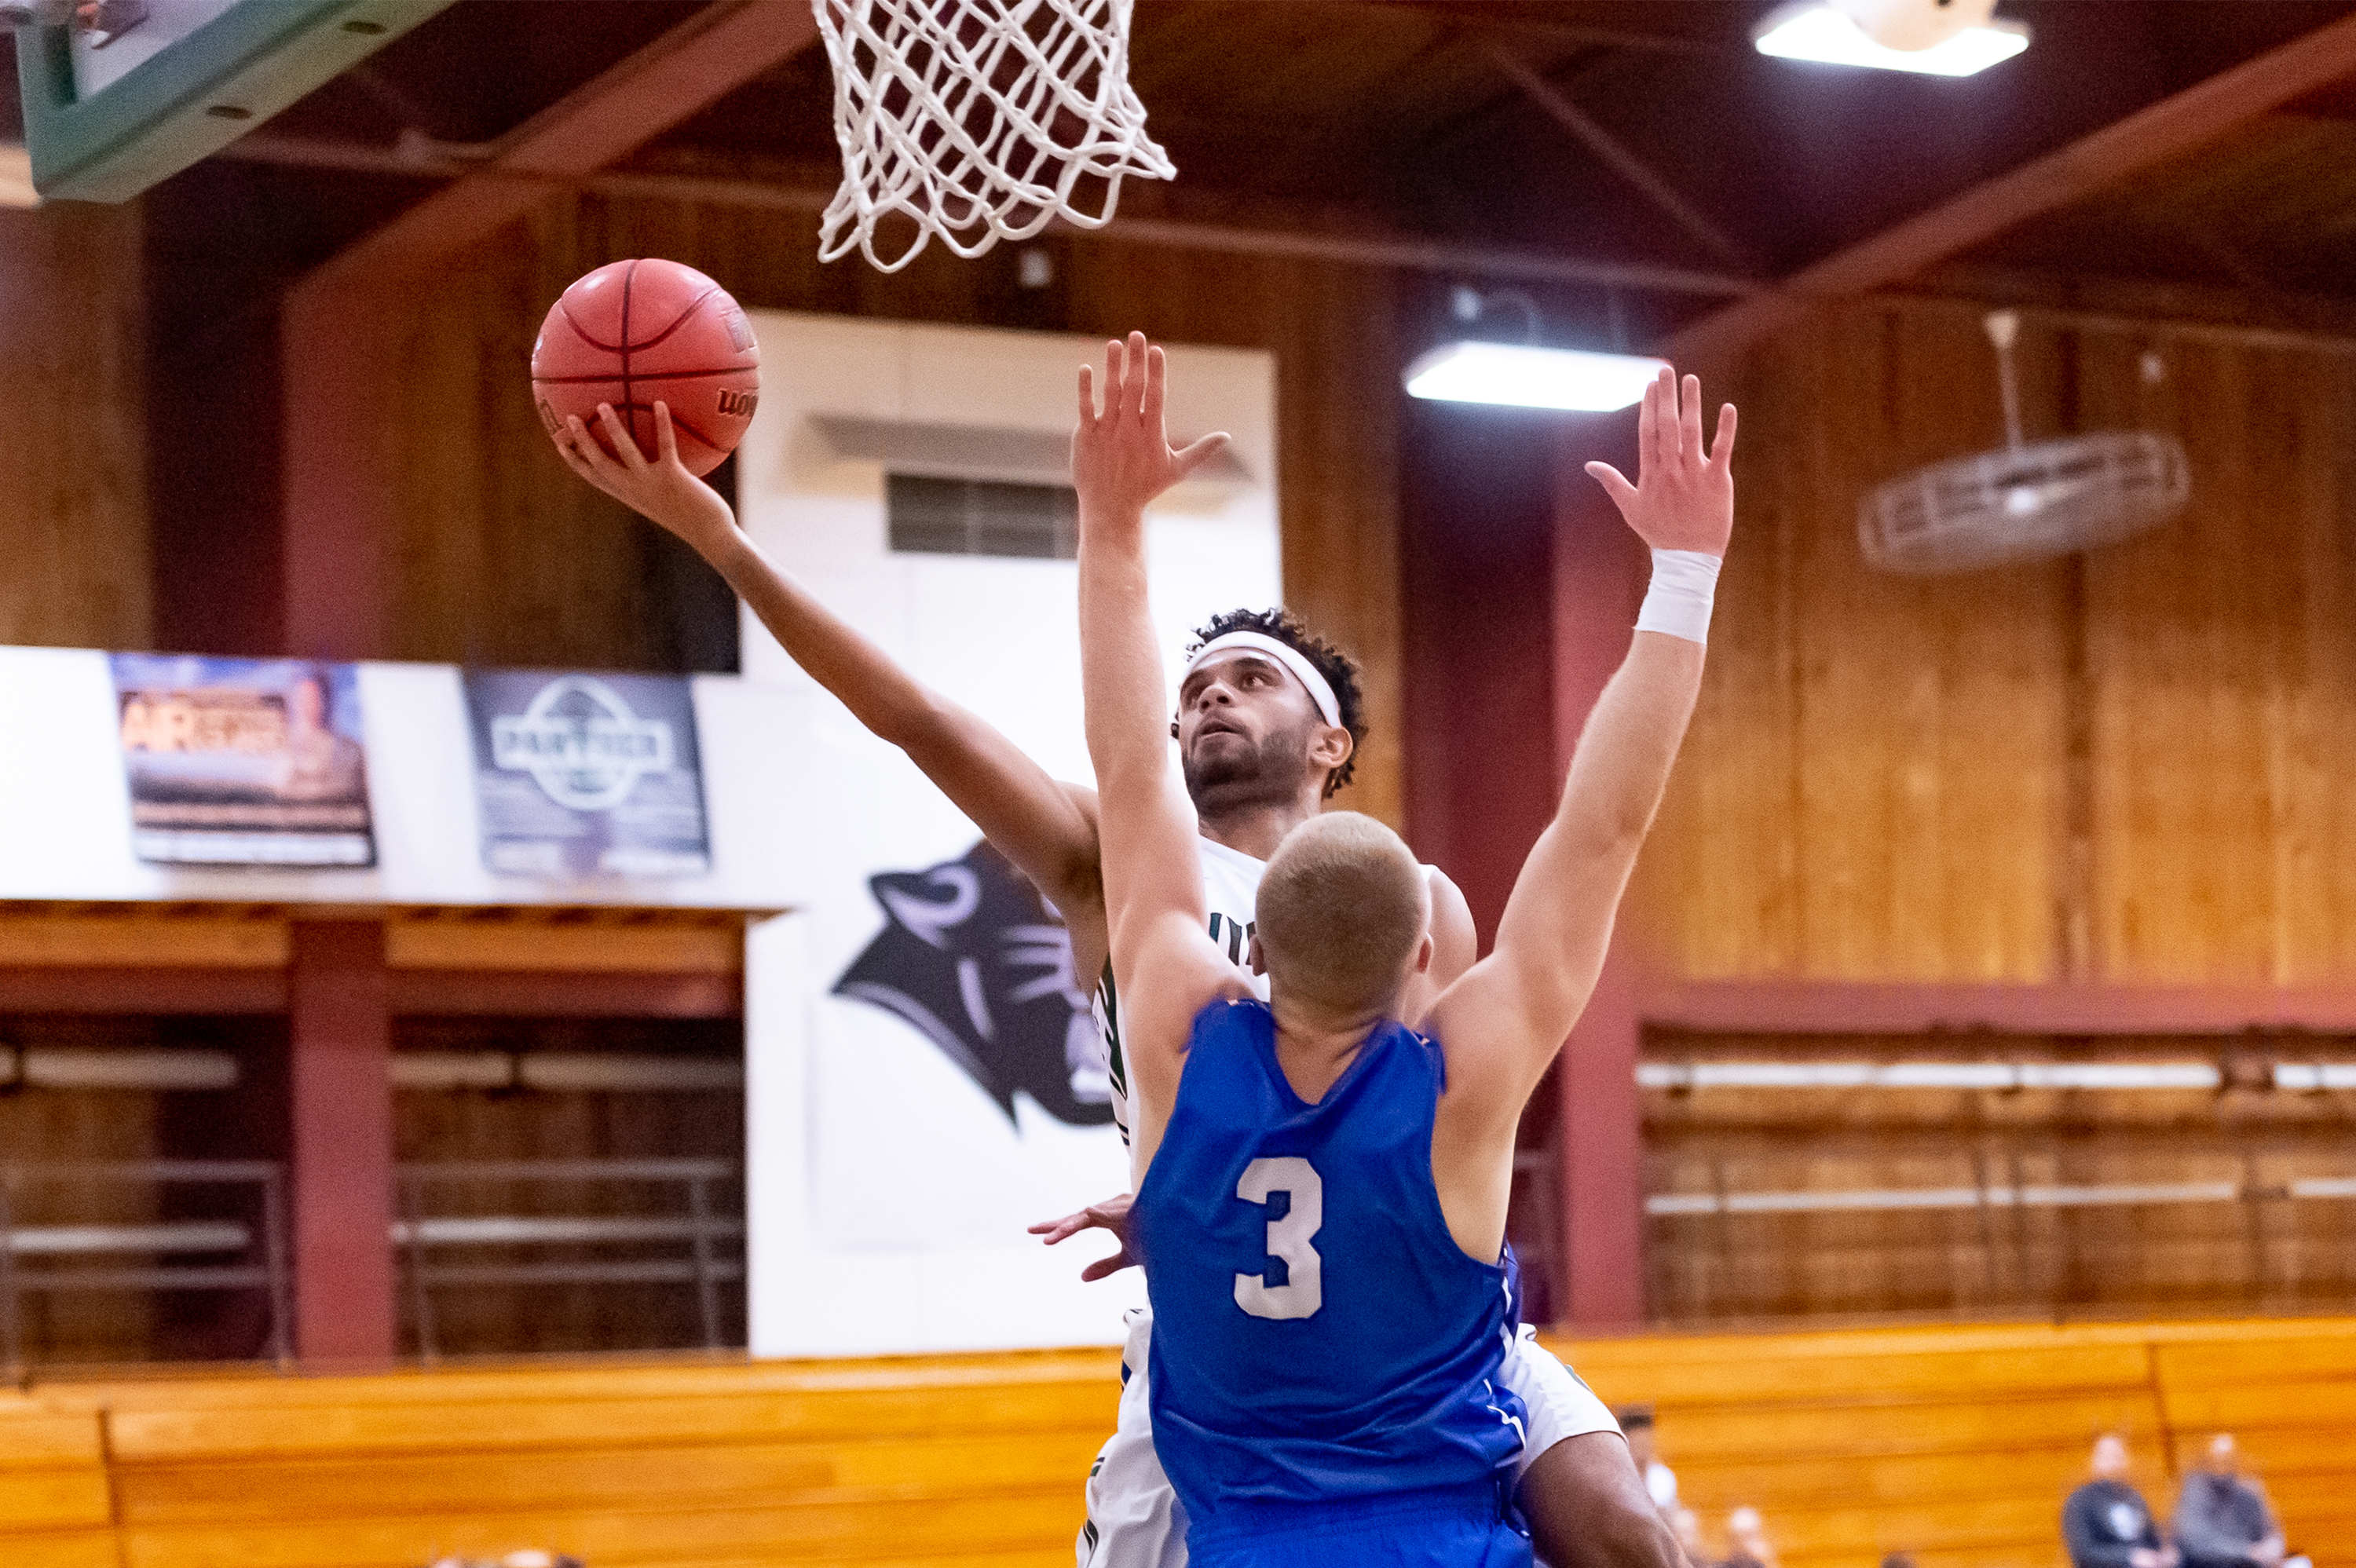 Men’s basketball standout Jaylen LeRoy surpassed the 1,000-point career threshold as a junior and was named to the All-LEC Second Team.